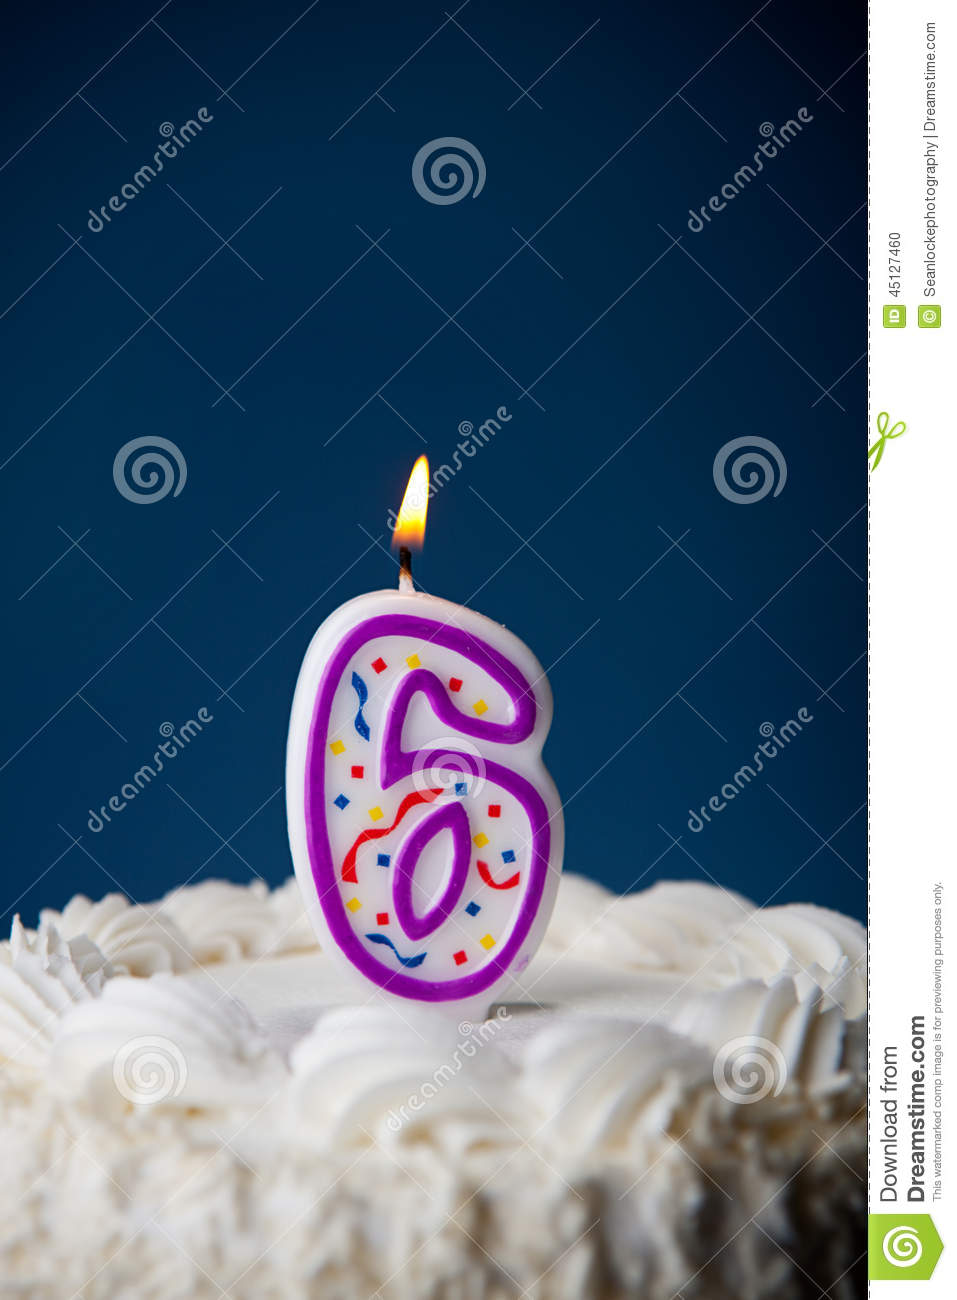 Cake  Birthday Cake With Candles For 6th Birthday Stock Photo   Image